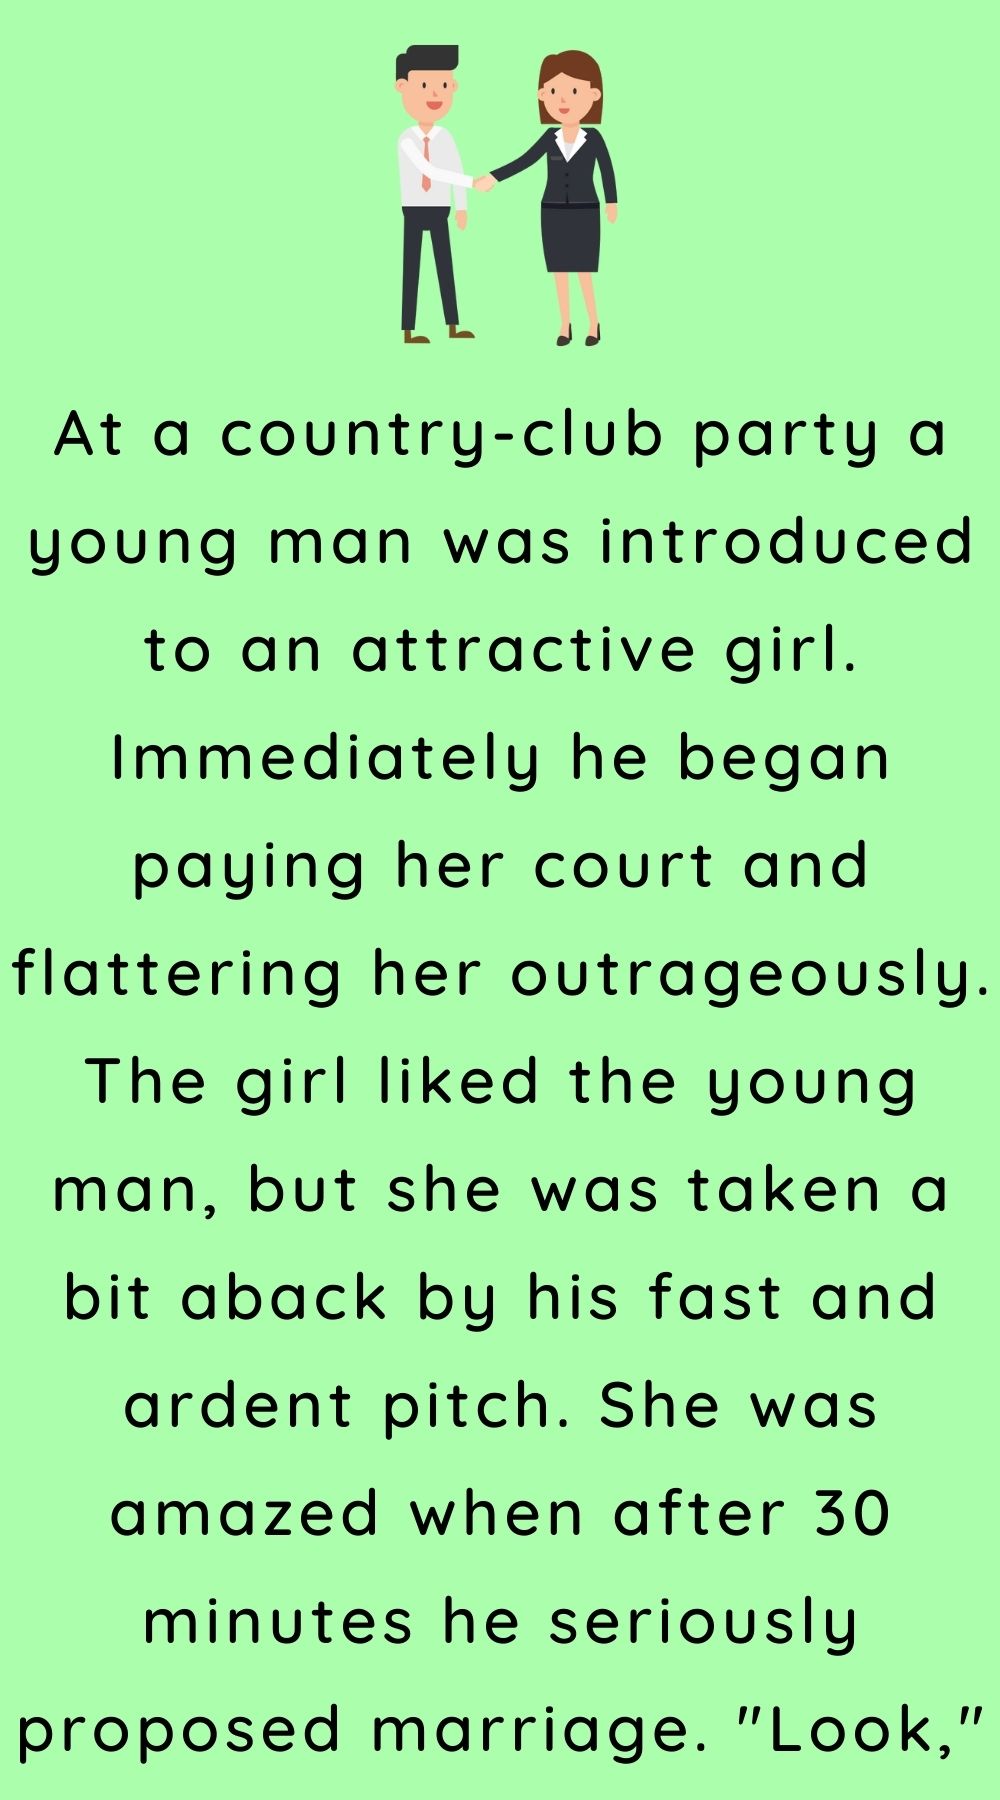 A young man was introduced to an attractive girl 